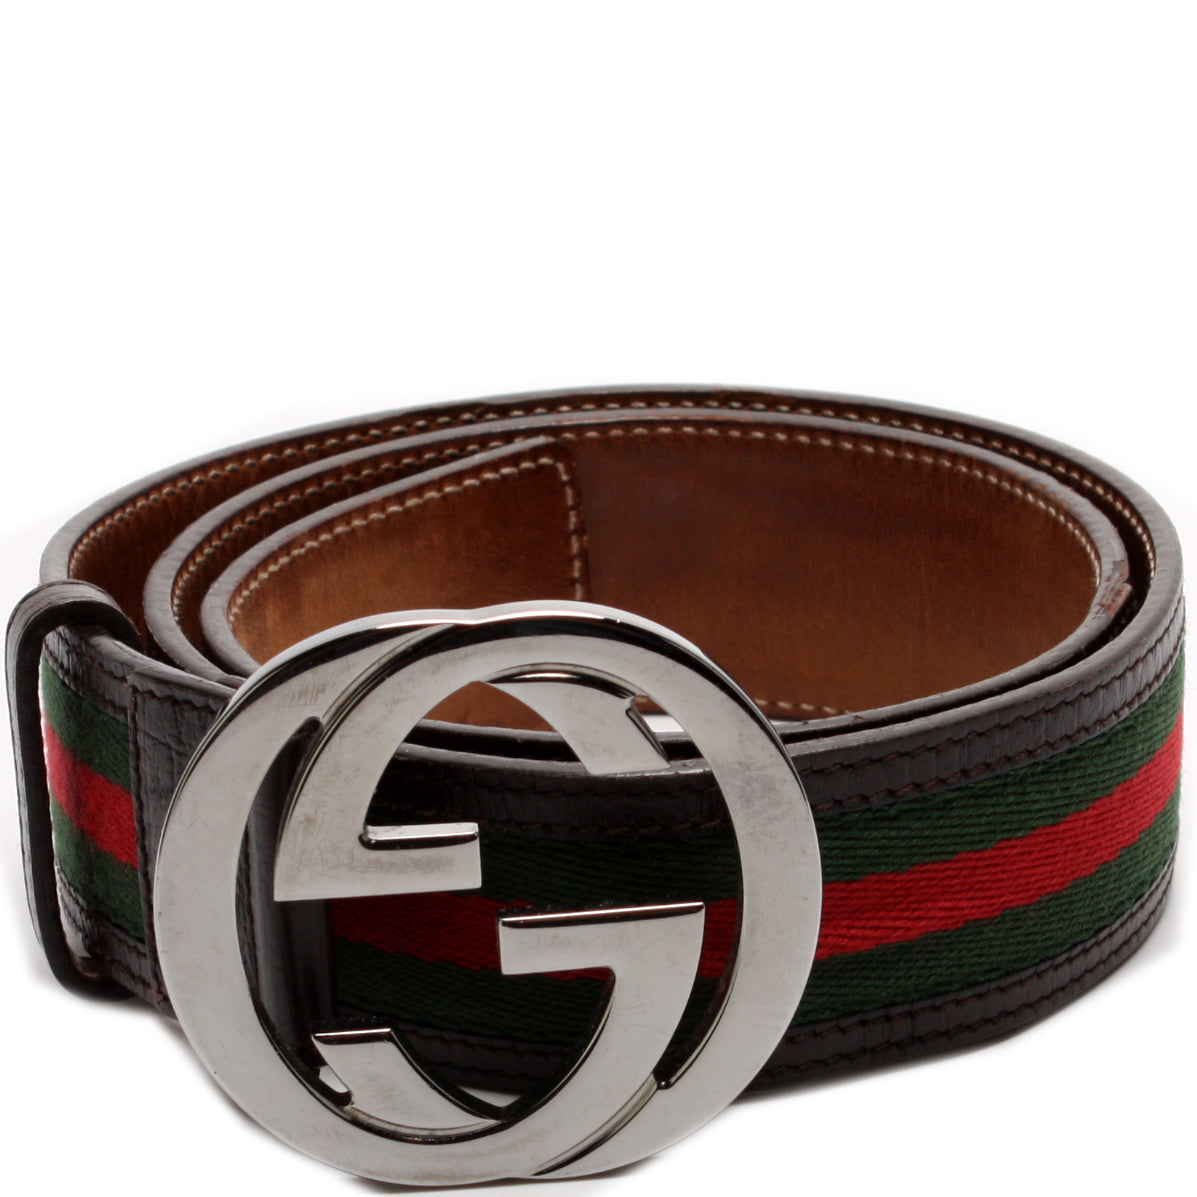 Gucci 42 Size Belts for Women for sale